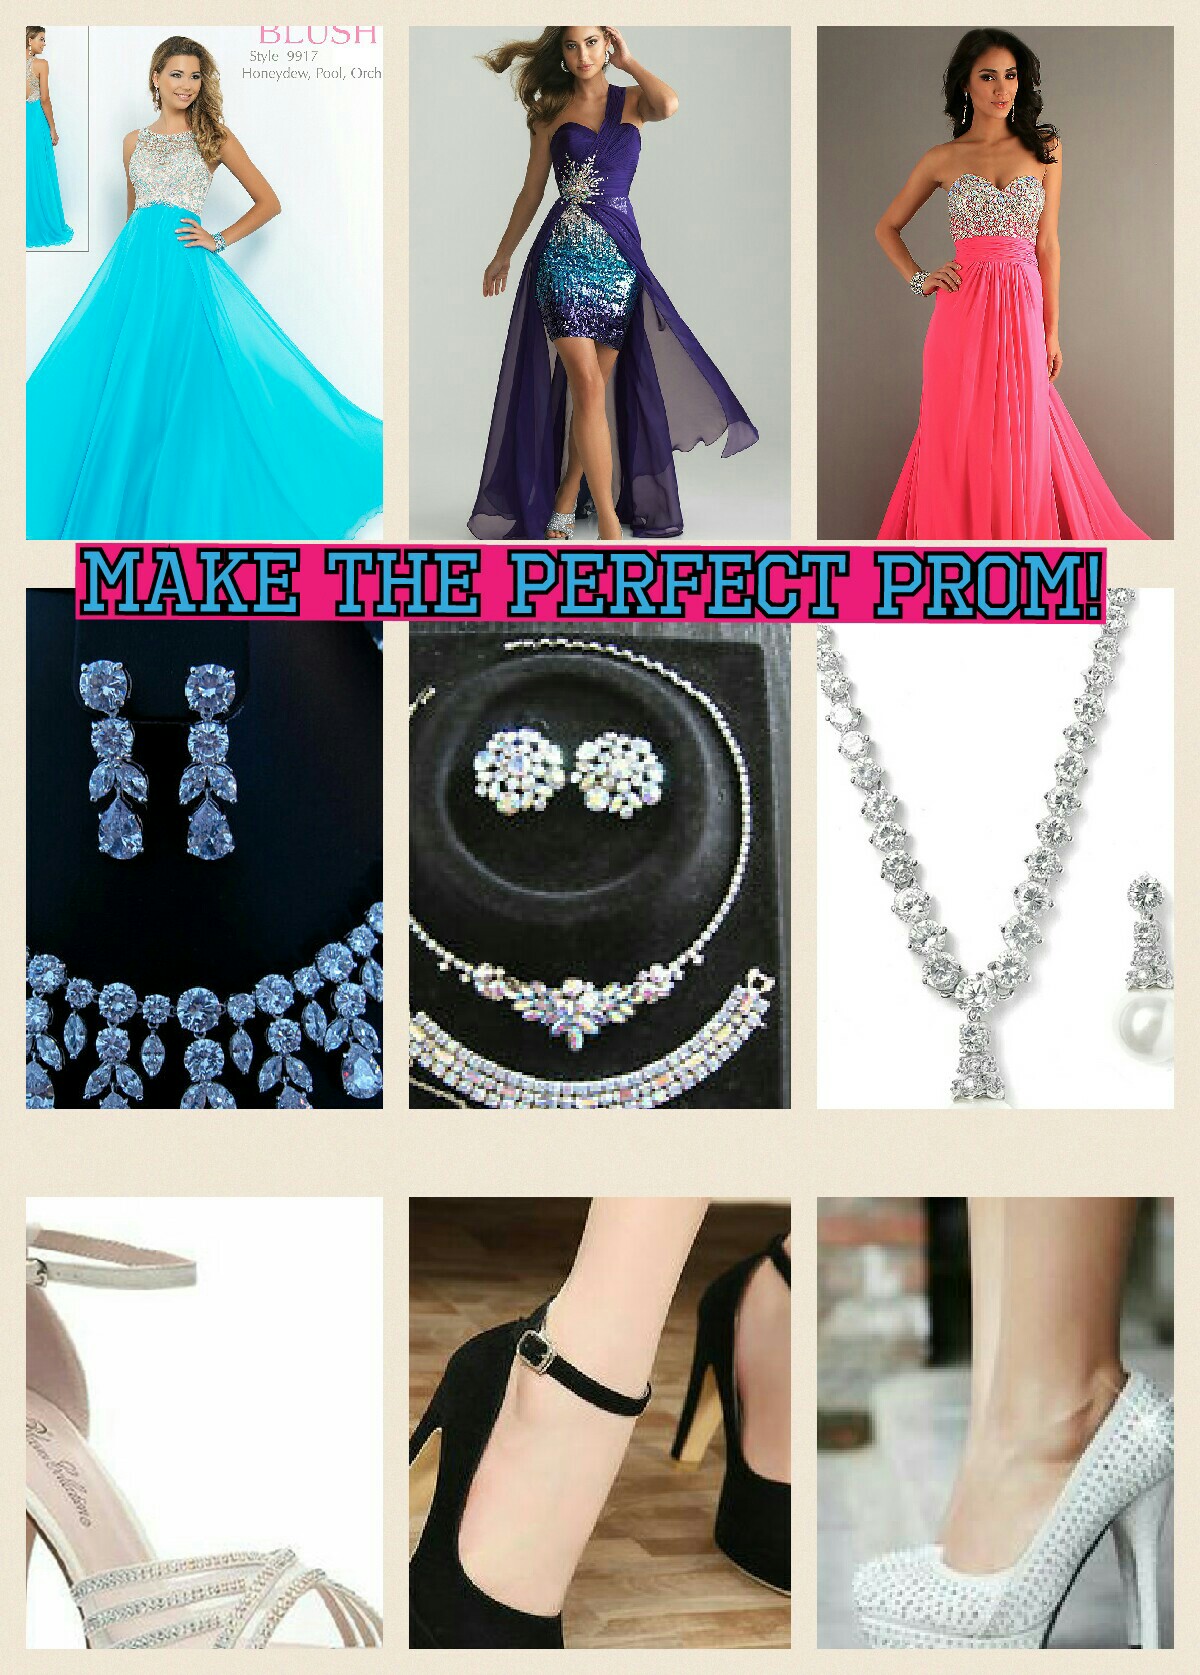 make the perfect prom!👸